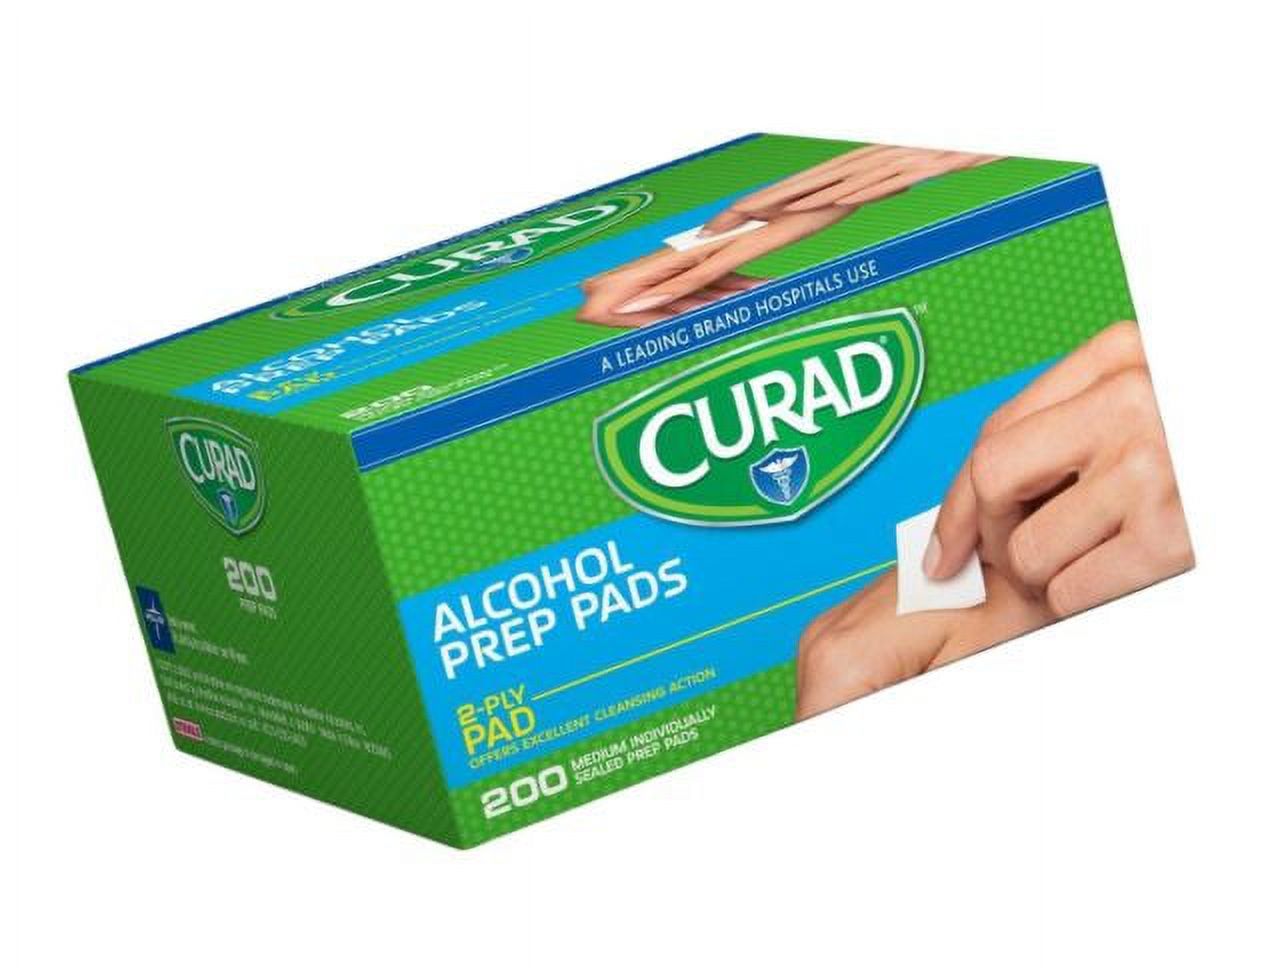 Curad 2-Ply Alcohol Prep Pads, 200 count - image 3 of 4